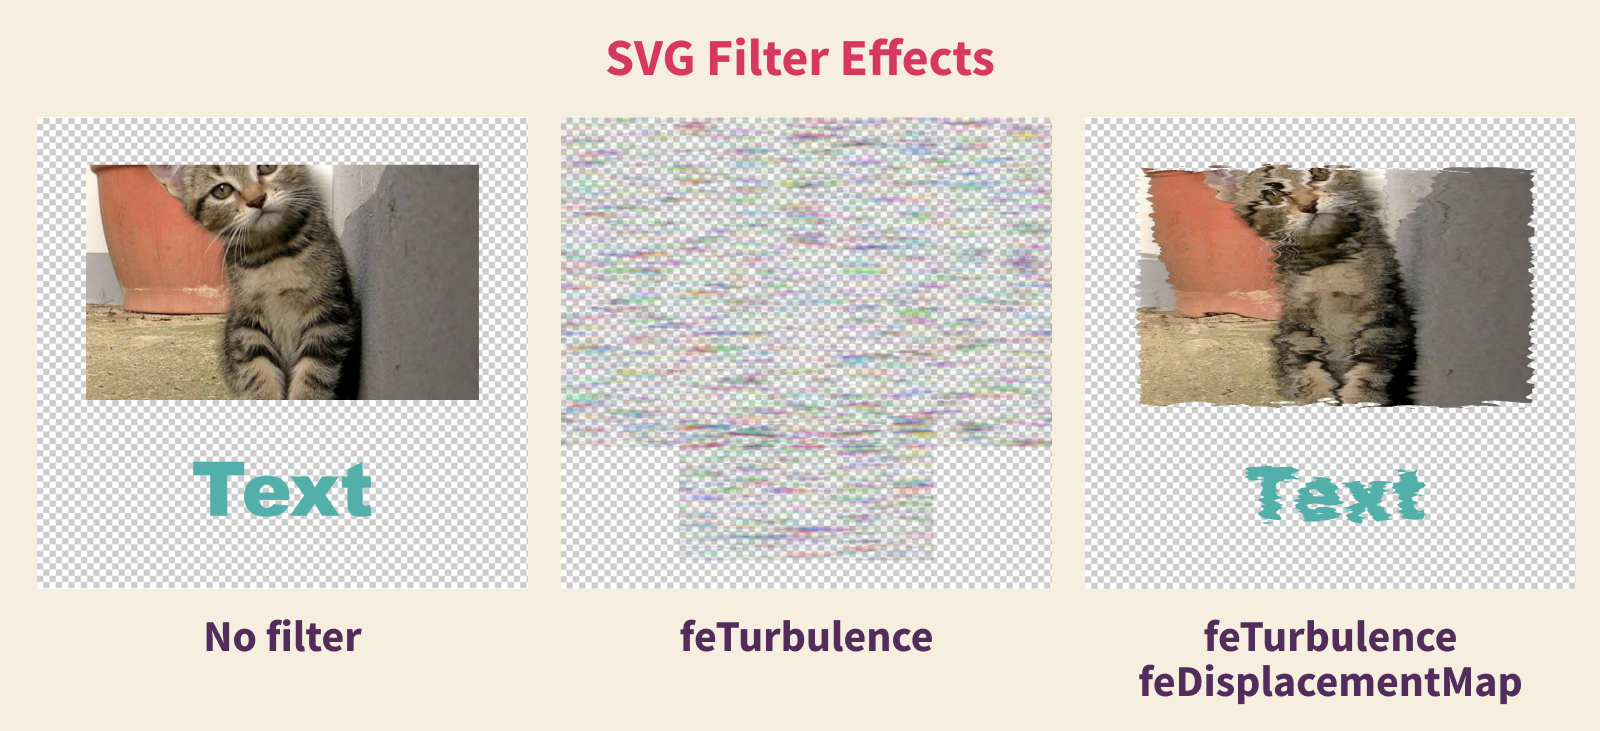 Showing the effect SVG Filters have on images and text